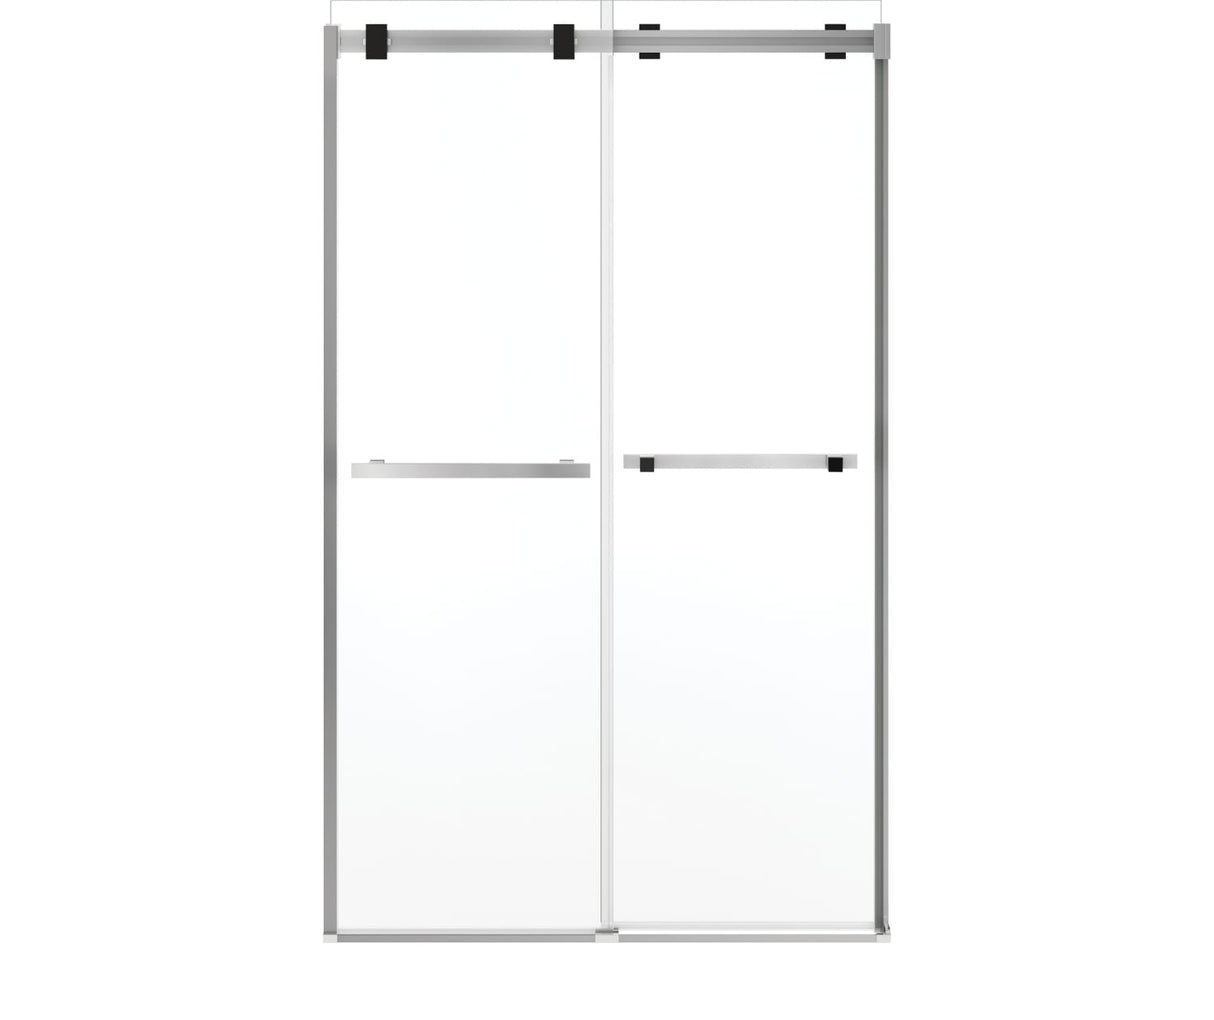 MAAX 136956-810-350-000 Duel Alto 44-47 X 78 in. 8mm Bypass Shower Door for Alcove Installation with GlassShield® glass in Chrome & Matte Black